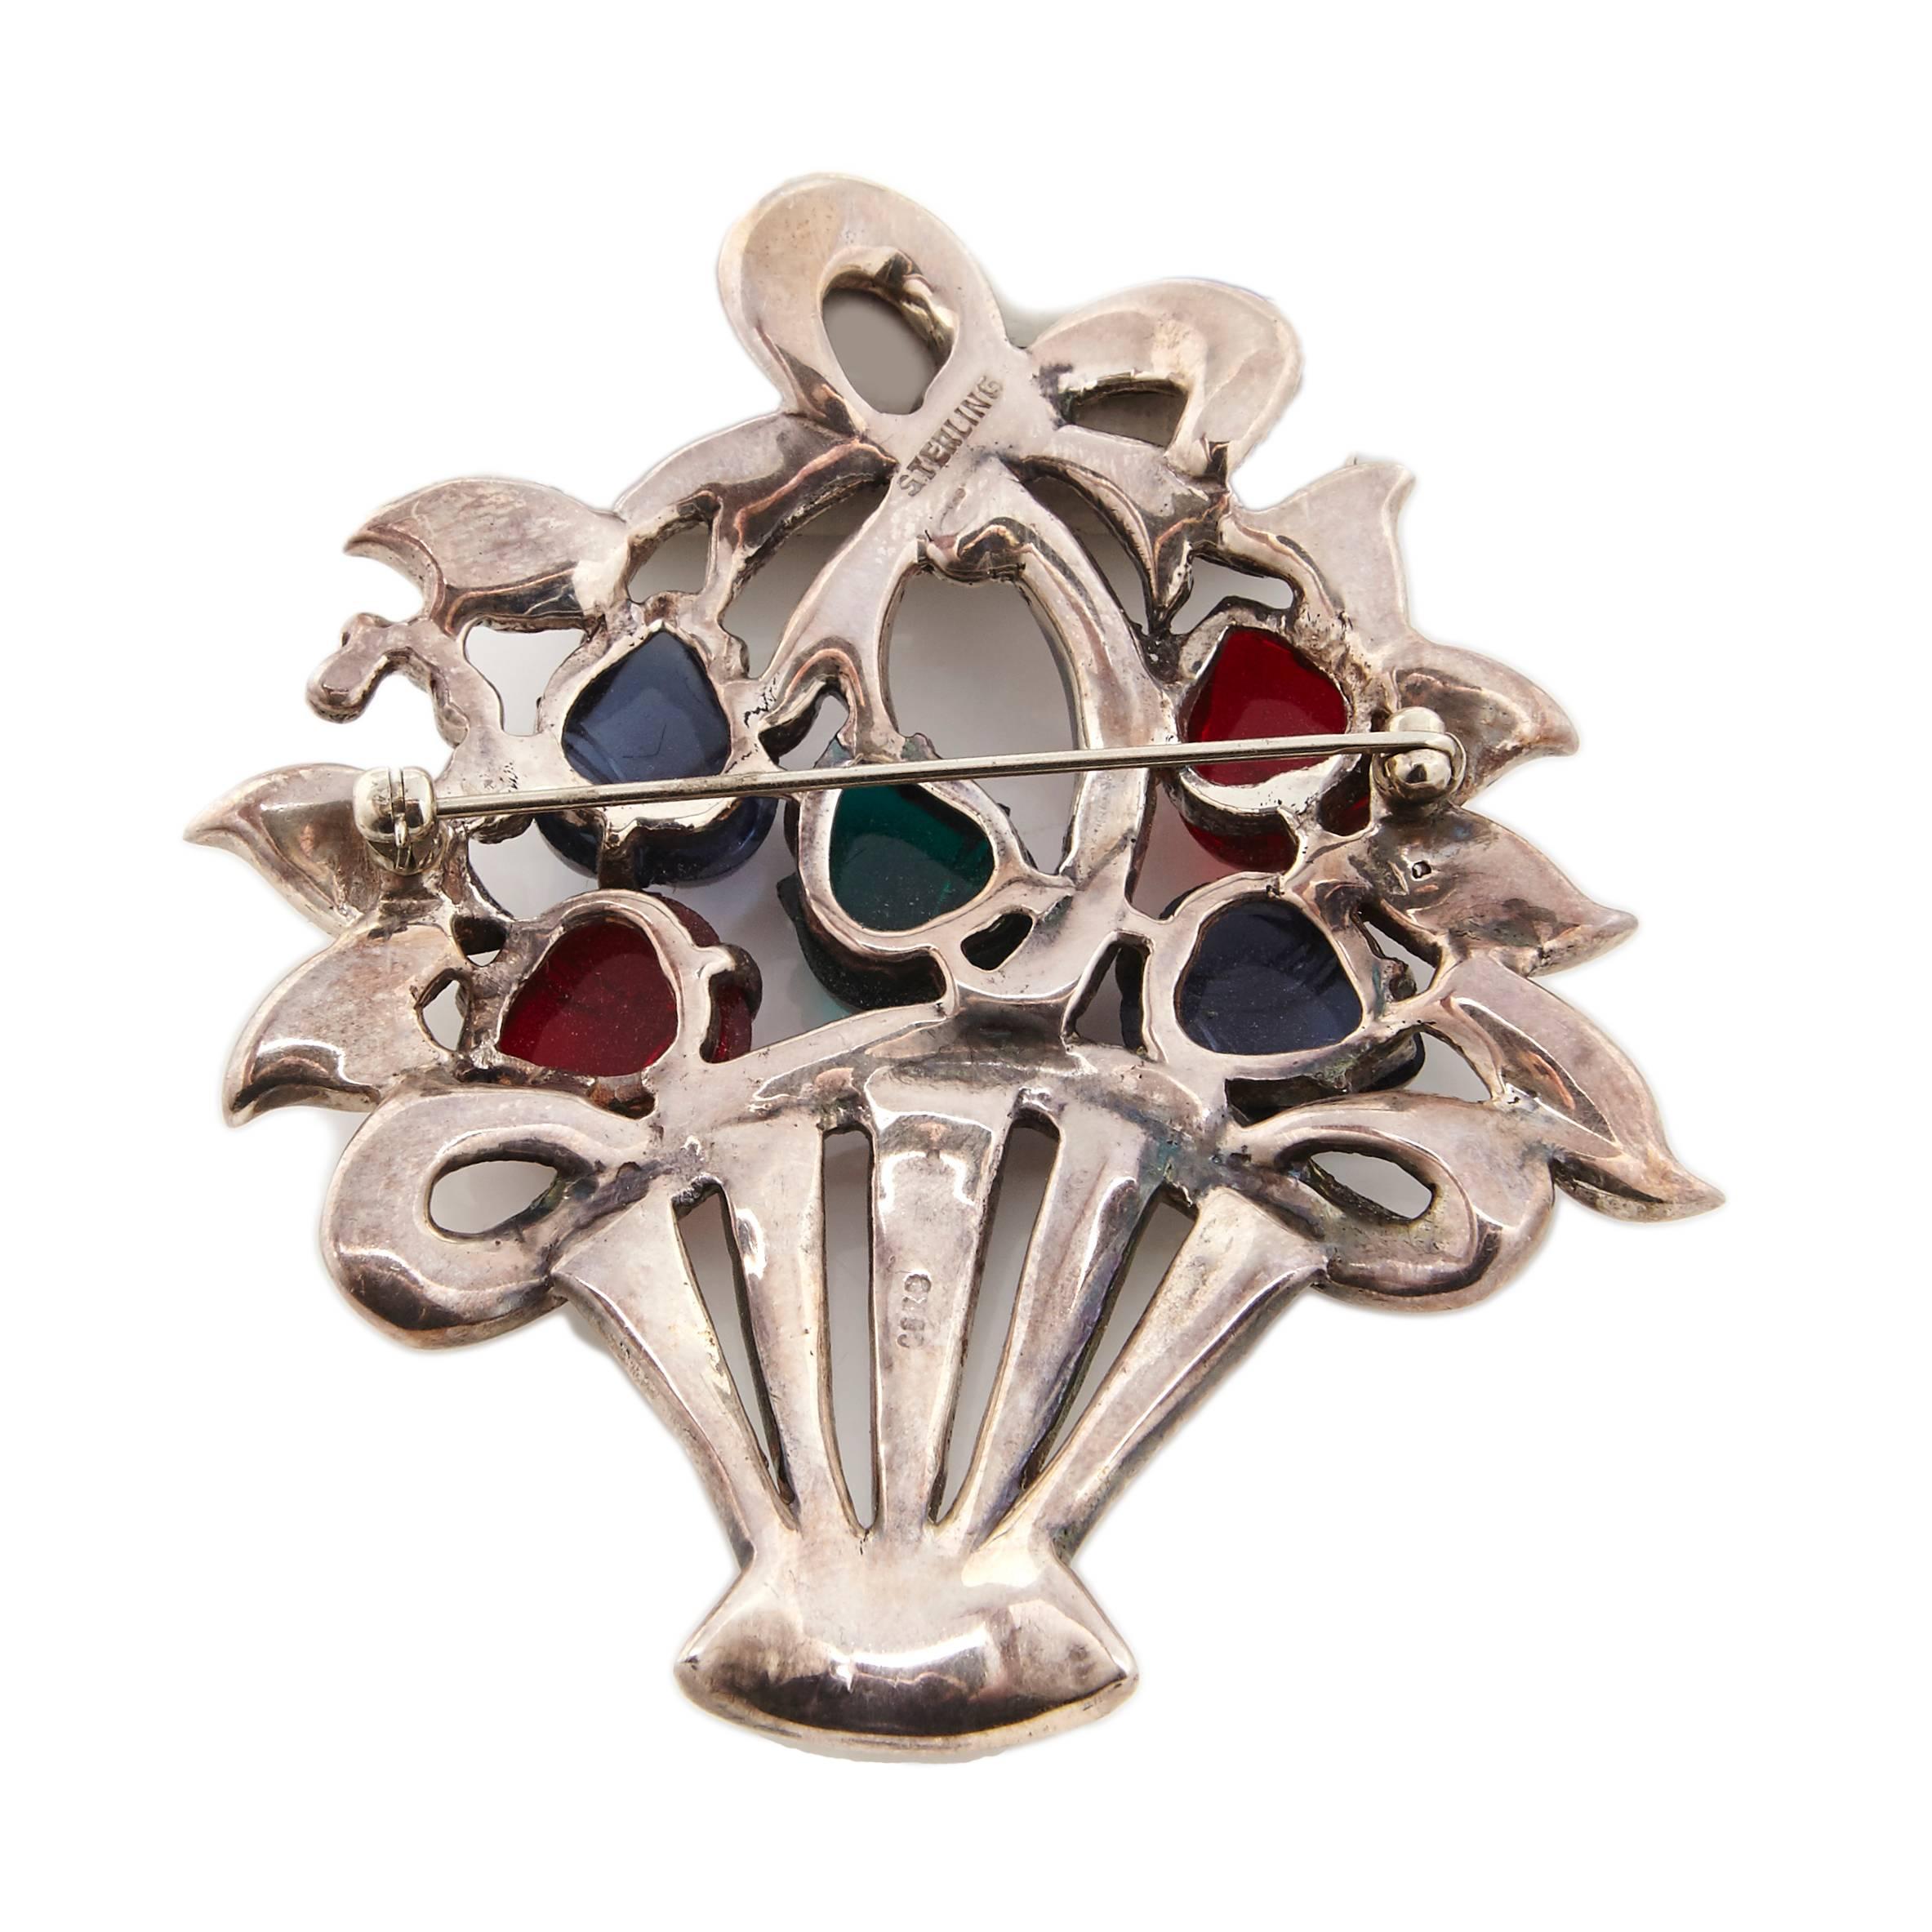 A large Sterling Silver basket brooch of fruit salad stones designed by Coro. The basket itself is set with clear crystal rhinestones and topped with a bow. 

Marked: Sterling and Coro on the reverse.

Inspired by Cartier's Tutti Frutti jewellery